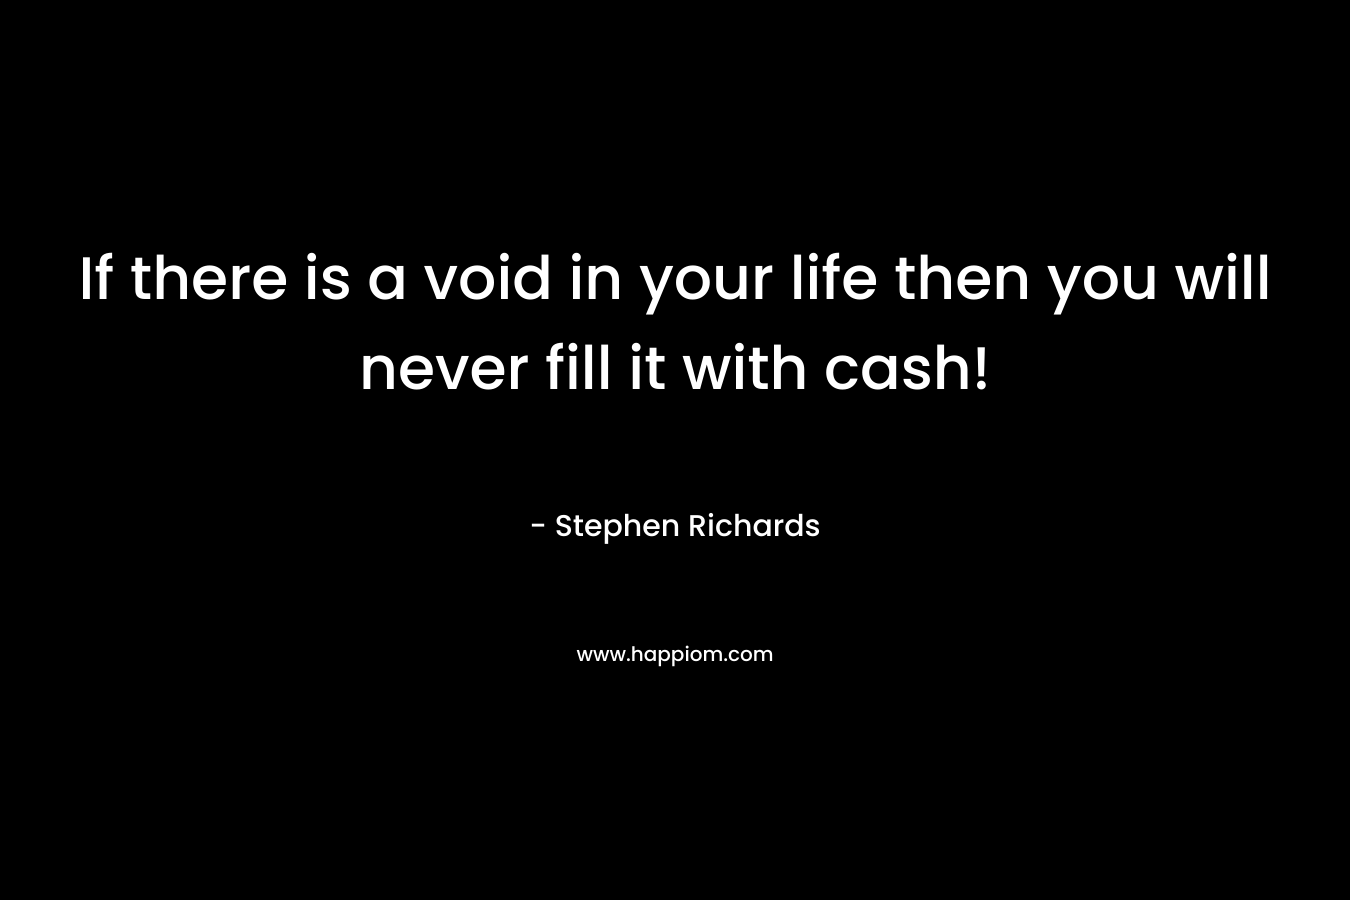 If there is a void in your life then you will never fill it with cash!